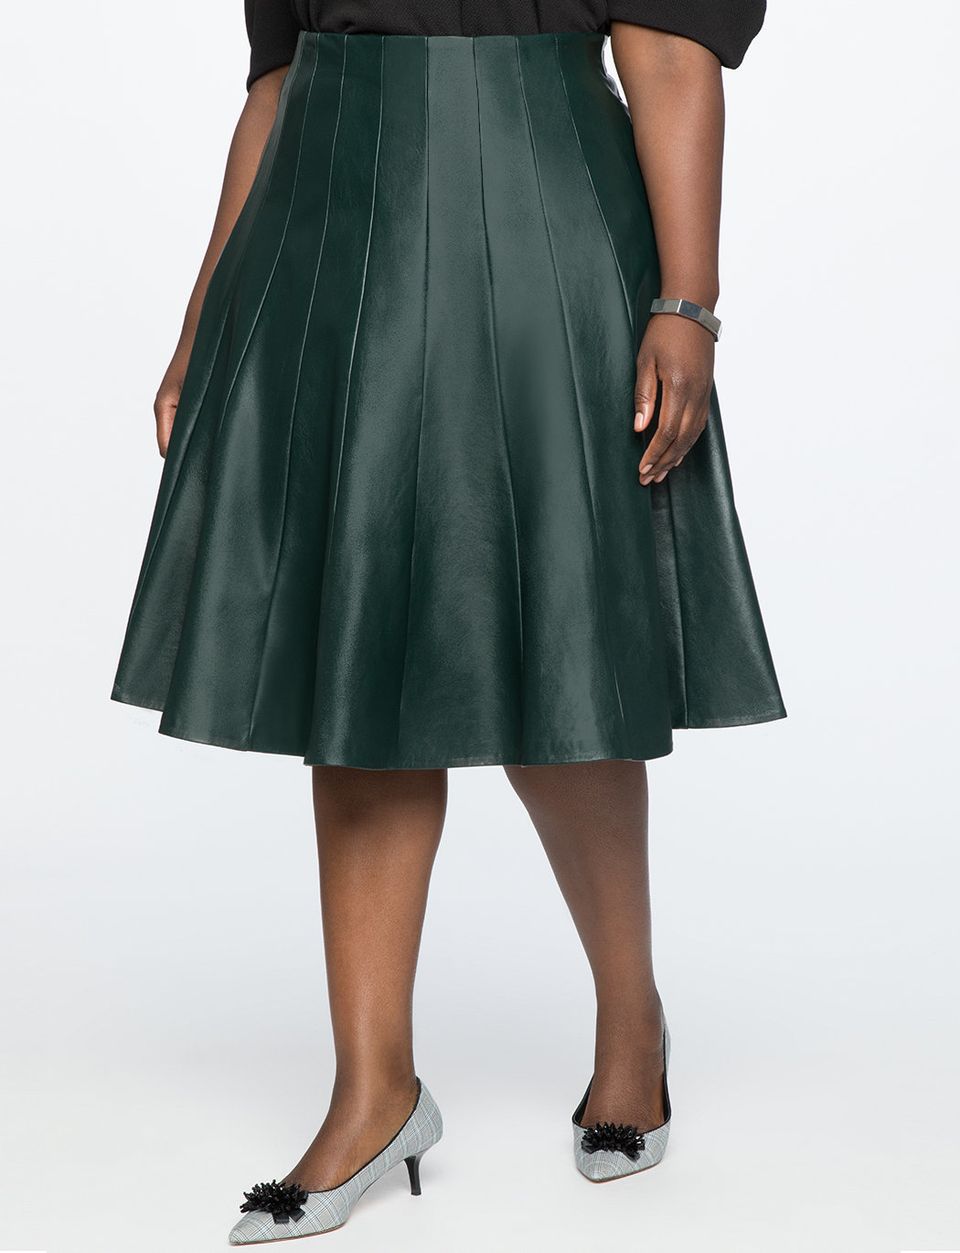 Plus Size Green Leather Skirt | vlr.eng.br